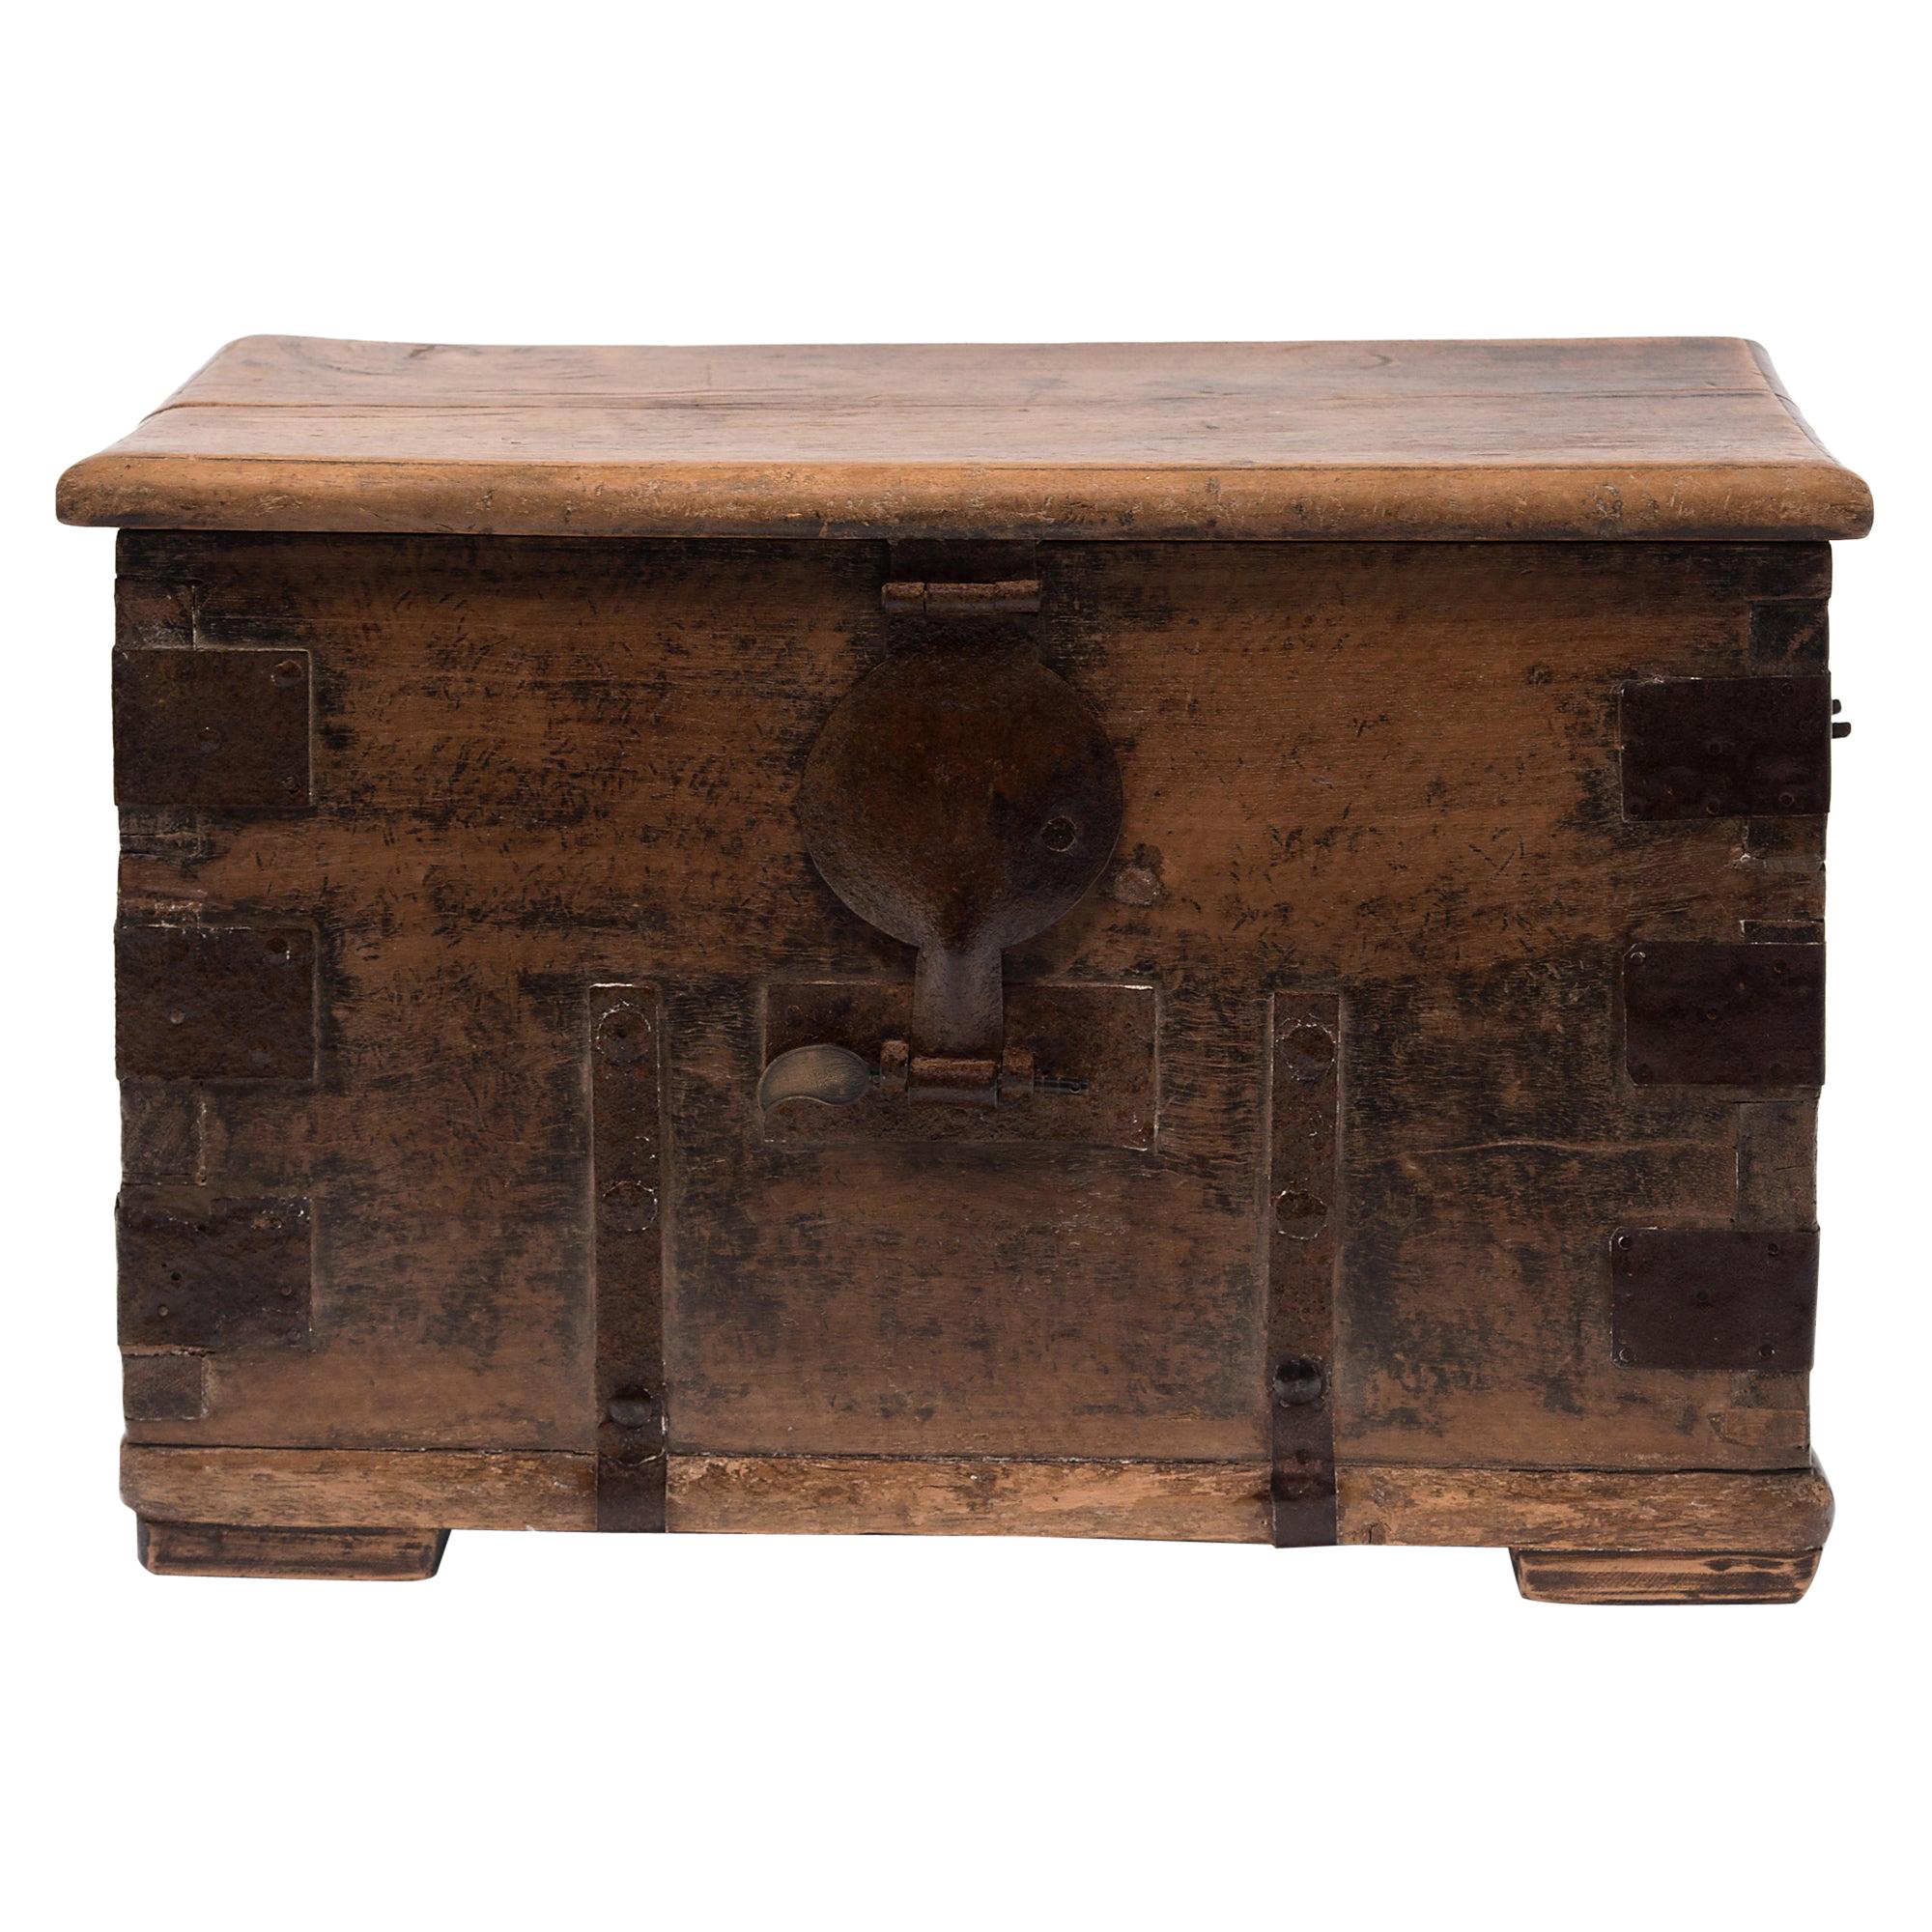 19th Century Chinese Iron Clad Keeper's Chest